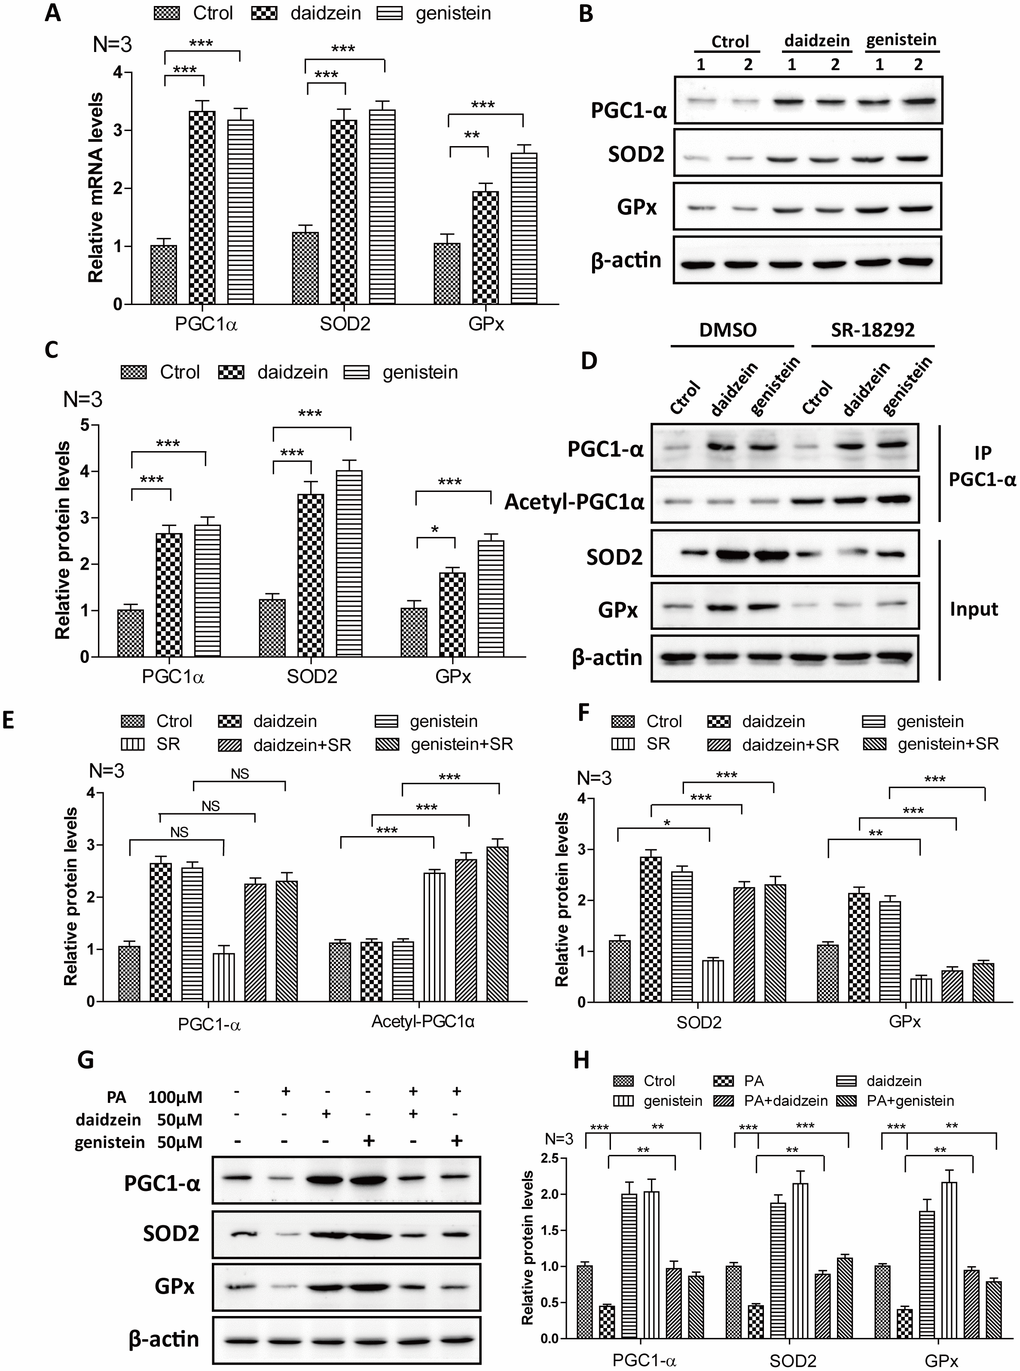 Soy isoflavones increase PGC1-alpha activity in hypothalamic cell line. (A) Quantification shows the mRNA levels of PGC1-alpha, SOD2 and GPx were increased under daidzein(50μM) and genistein(50μM) treatment for 24h in N42 cells; (B, C) Western blots and quantification show the protein levels of PGC1-alpha, SOD2 and GPx were increased under daidzein(50μM) and genistein(50μM) treatment for 24h in N42 cells; (D–F) Western blots and quantification show the SR-18292(20μM) administration inhibited the protein levels of SOD2 and GPx induced by daidzein and genistein treatment in N42 cells. (G, H) Western blots and quantification show the PA(100μM) administration inhibited the protein levels of PGC1-alpha, SOD2 and GPx, while daidzein and genistein could abolish the inhibition of PA in N42 cells. ns, no statistical significance, * p 